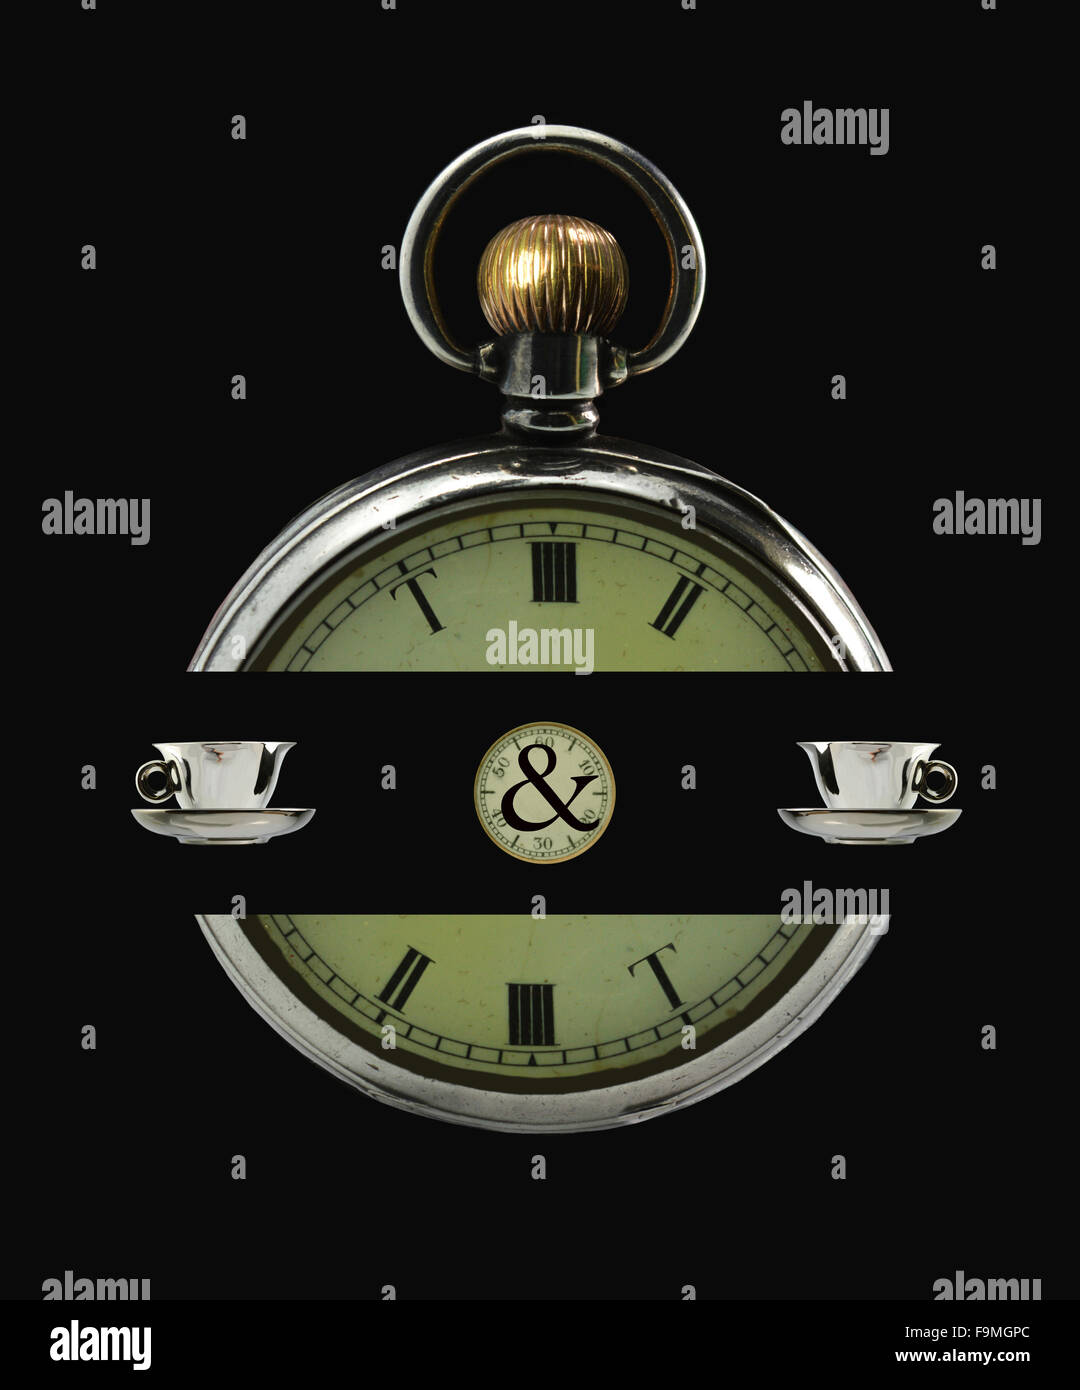 An antique pocket watch with numerals altered to read 'Tea for Two'. Stock Photo